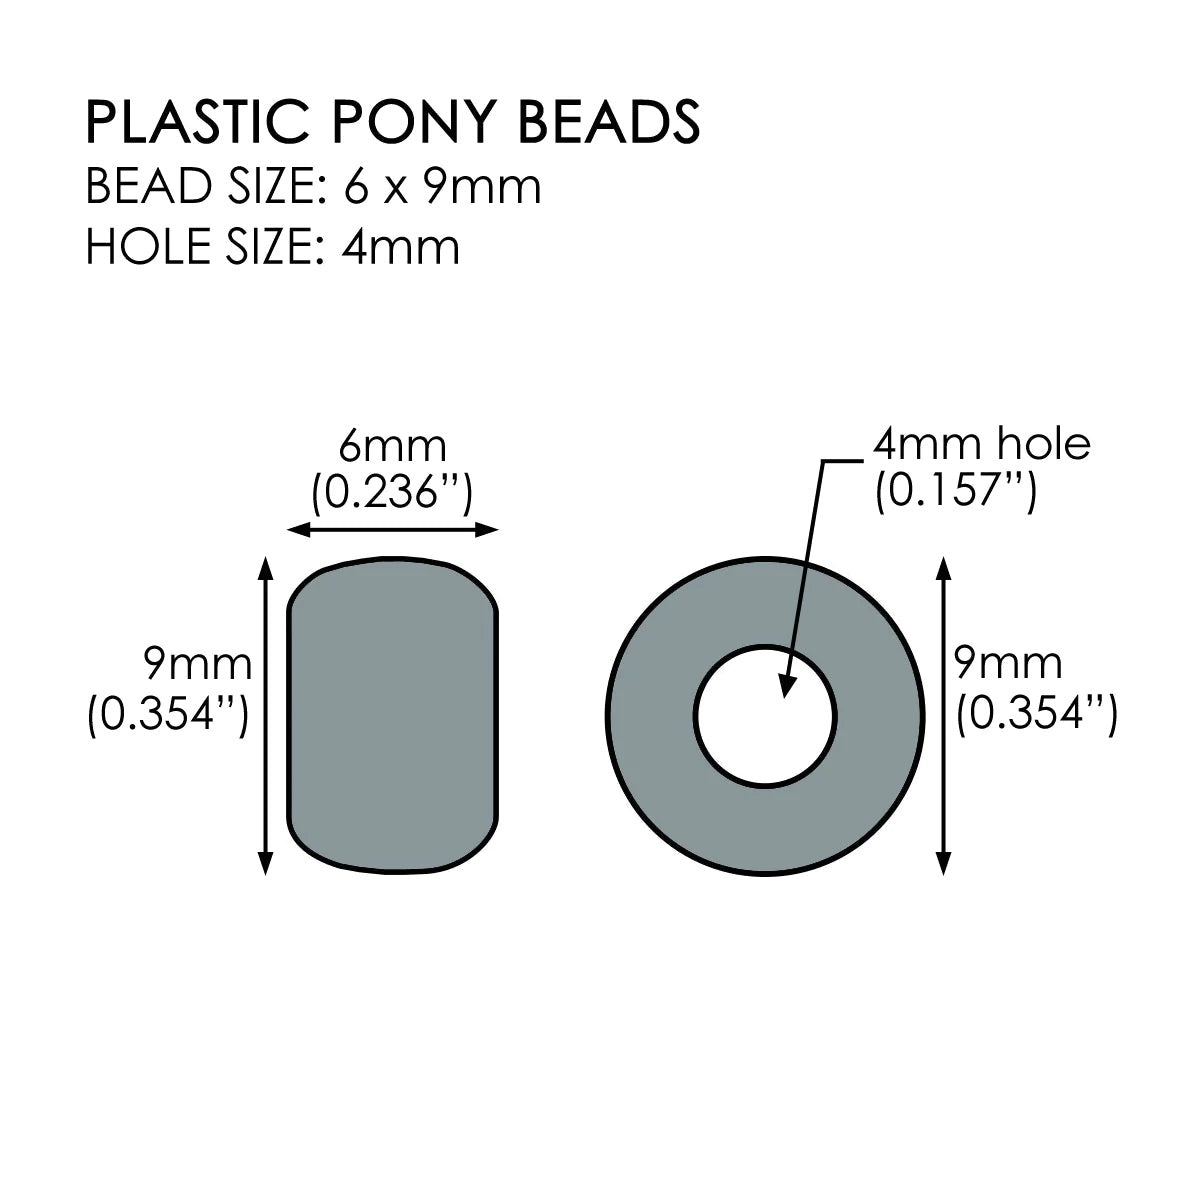 Neon 6 x 9mm Pony Bead Variety Pack - 9 Colors (4500 beads total)